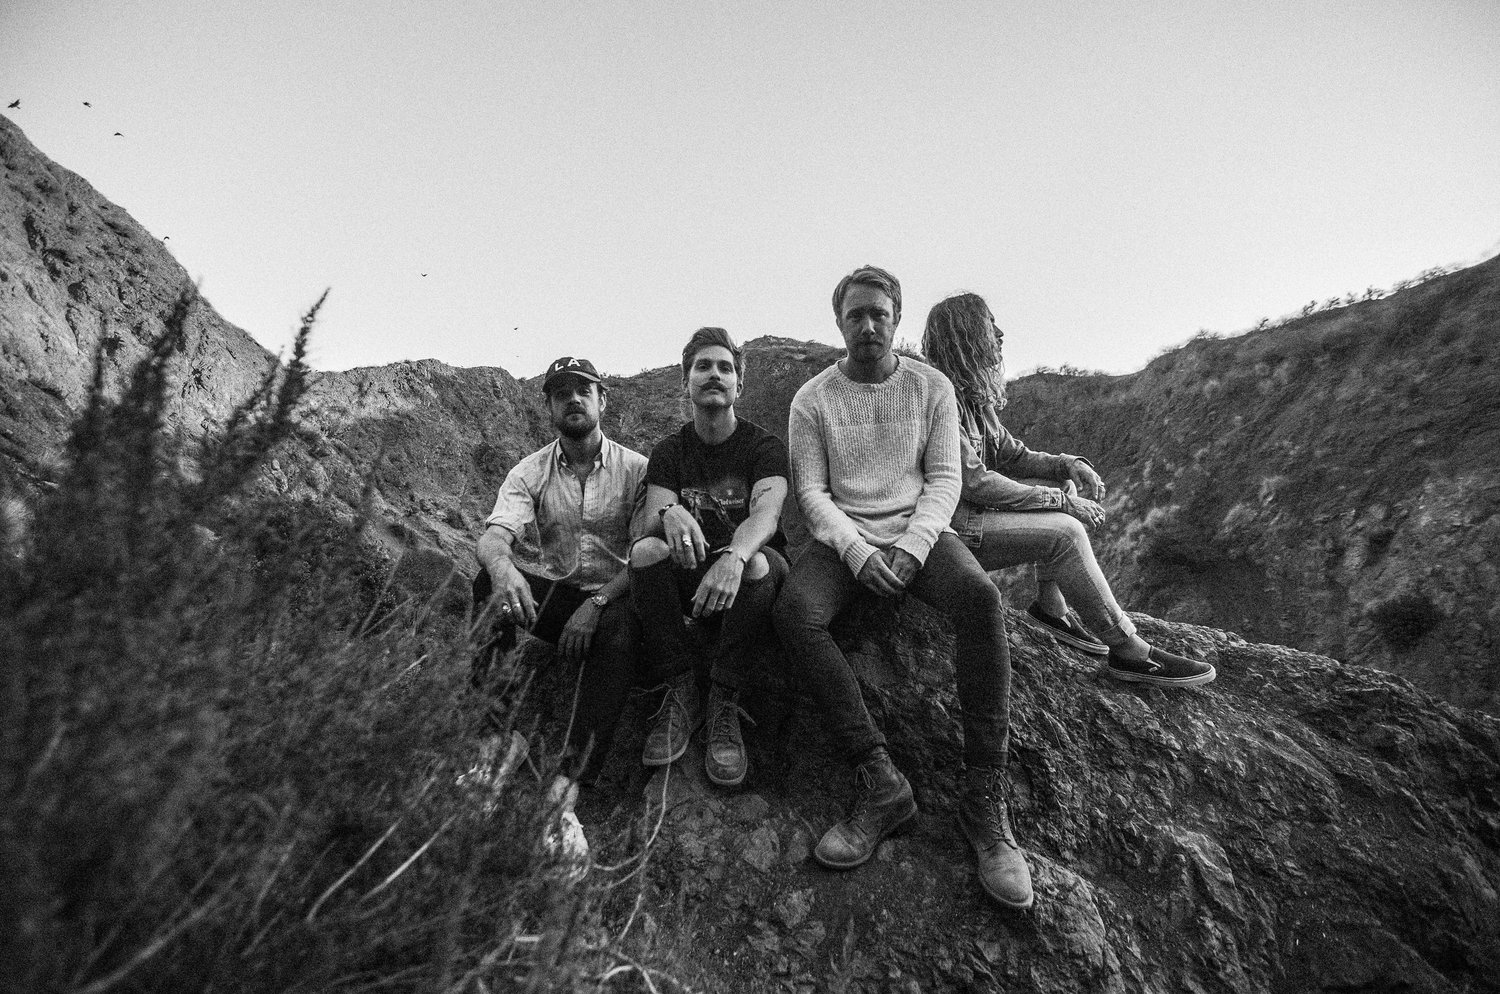 "You Don't Love Me" by Wilderado is Northern Transmissions' 'Song of the Day'